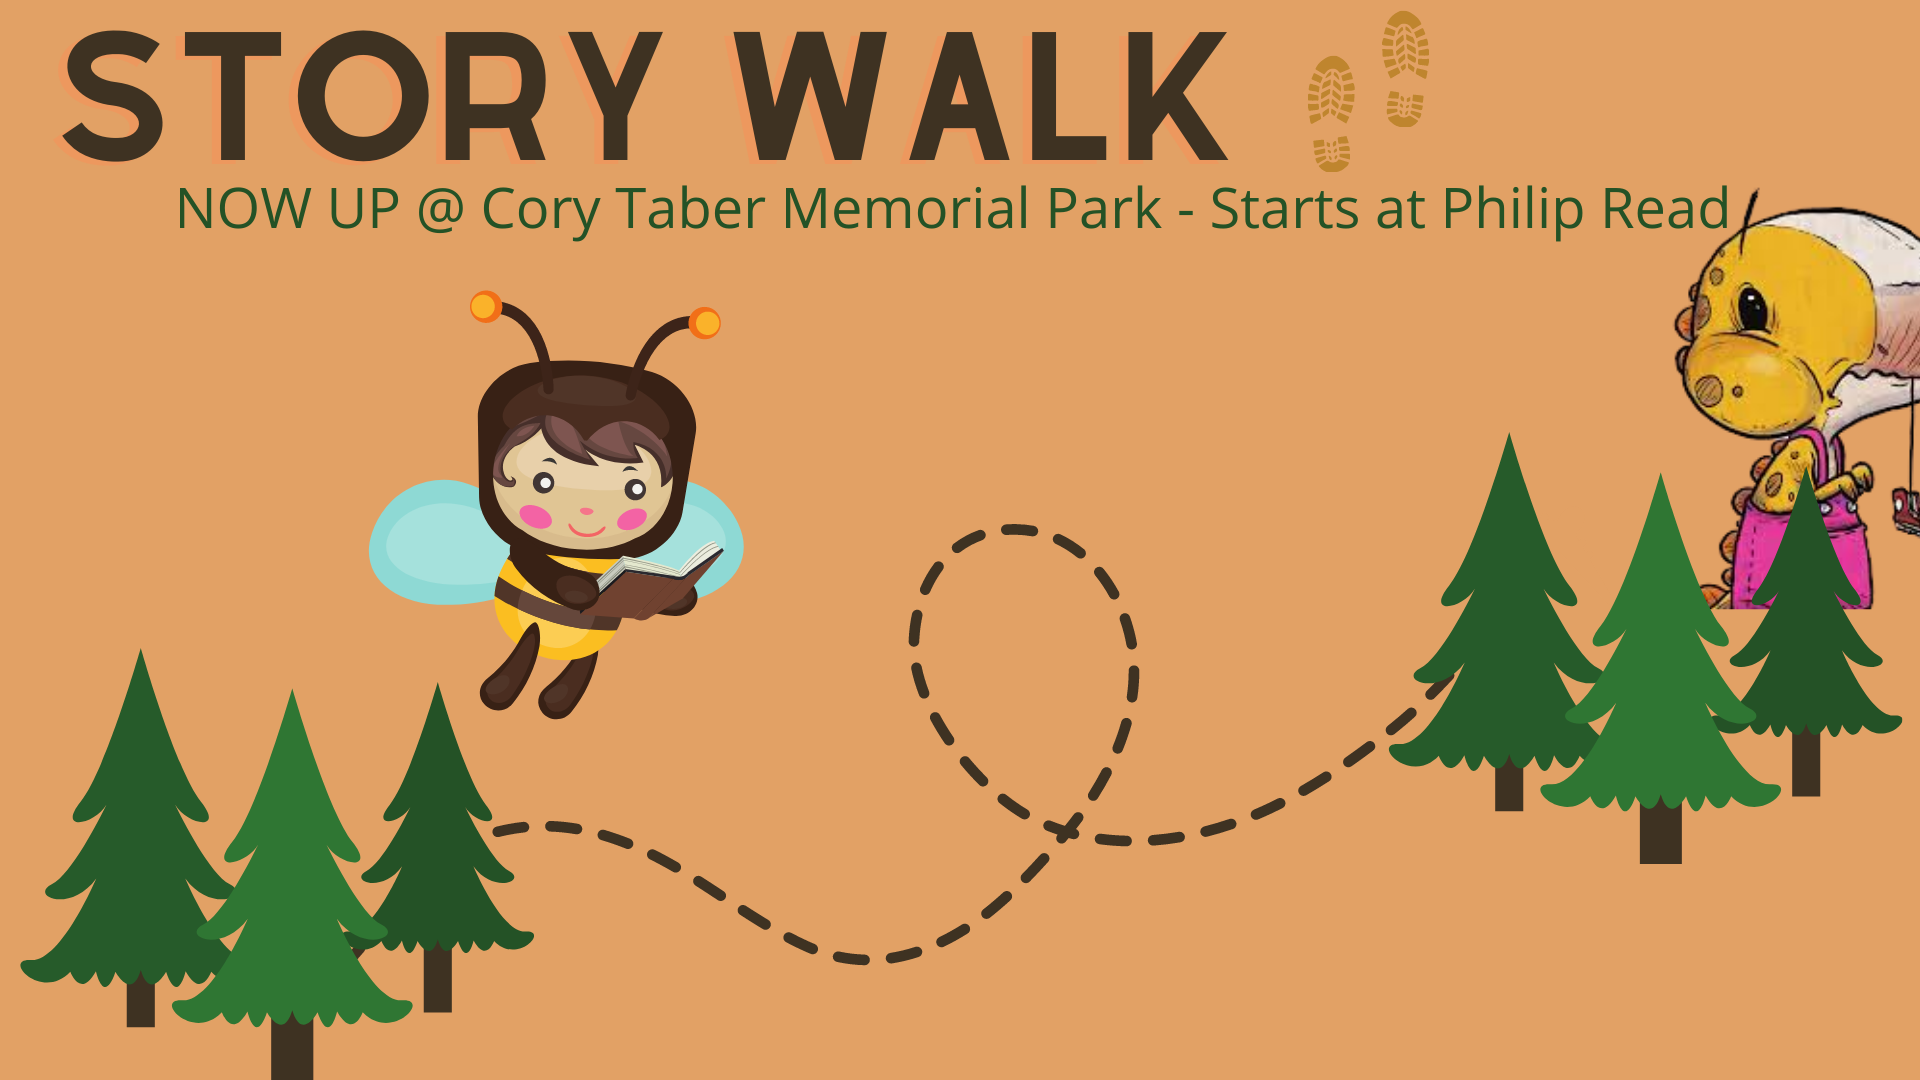 storywalk at cory taber field now up